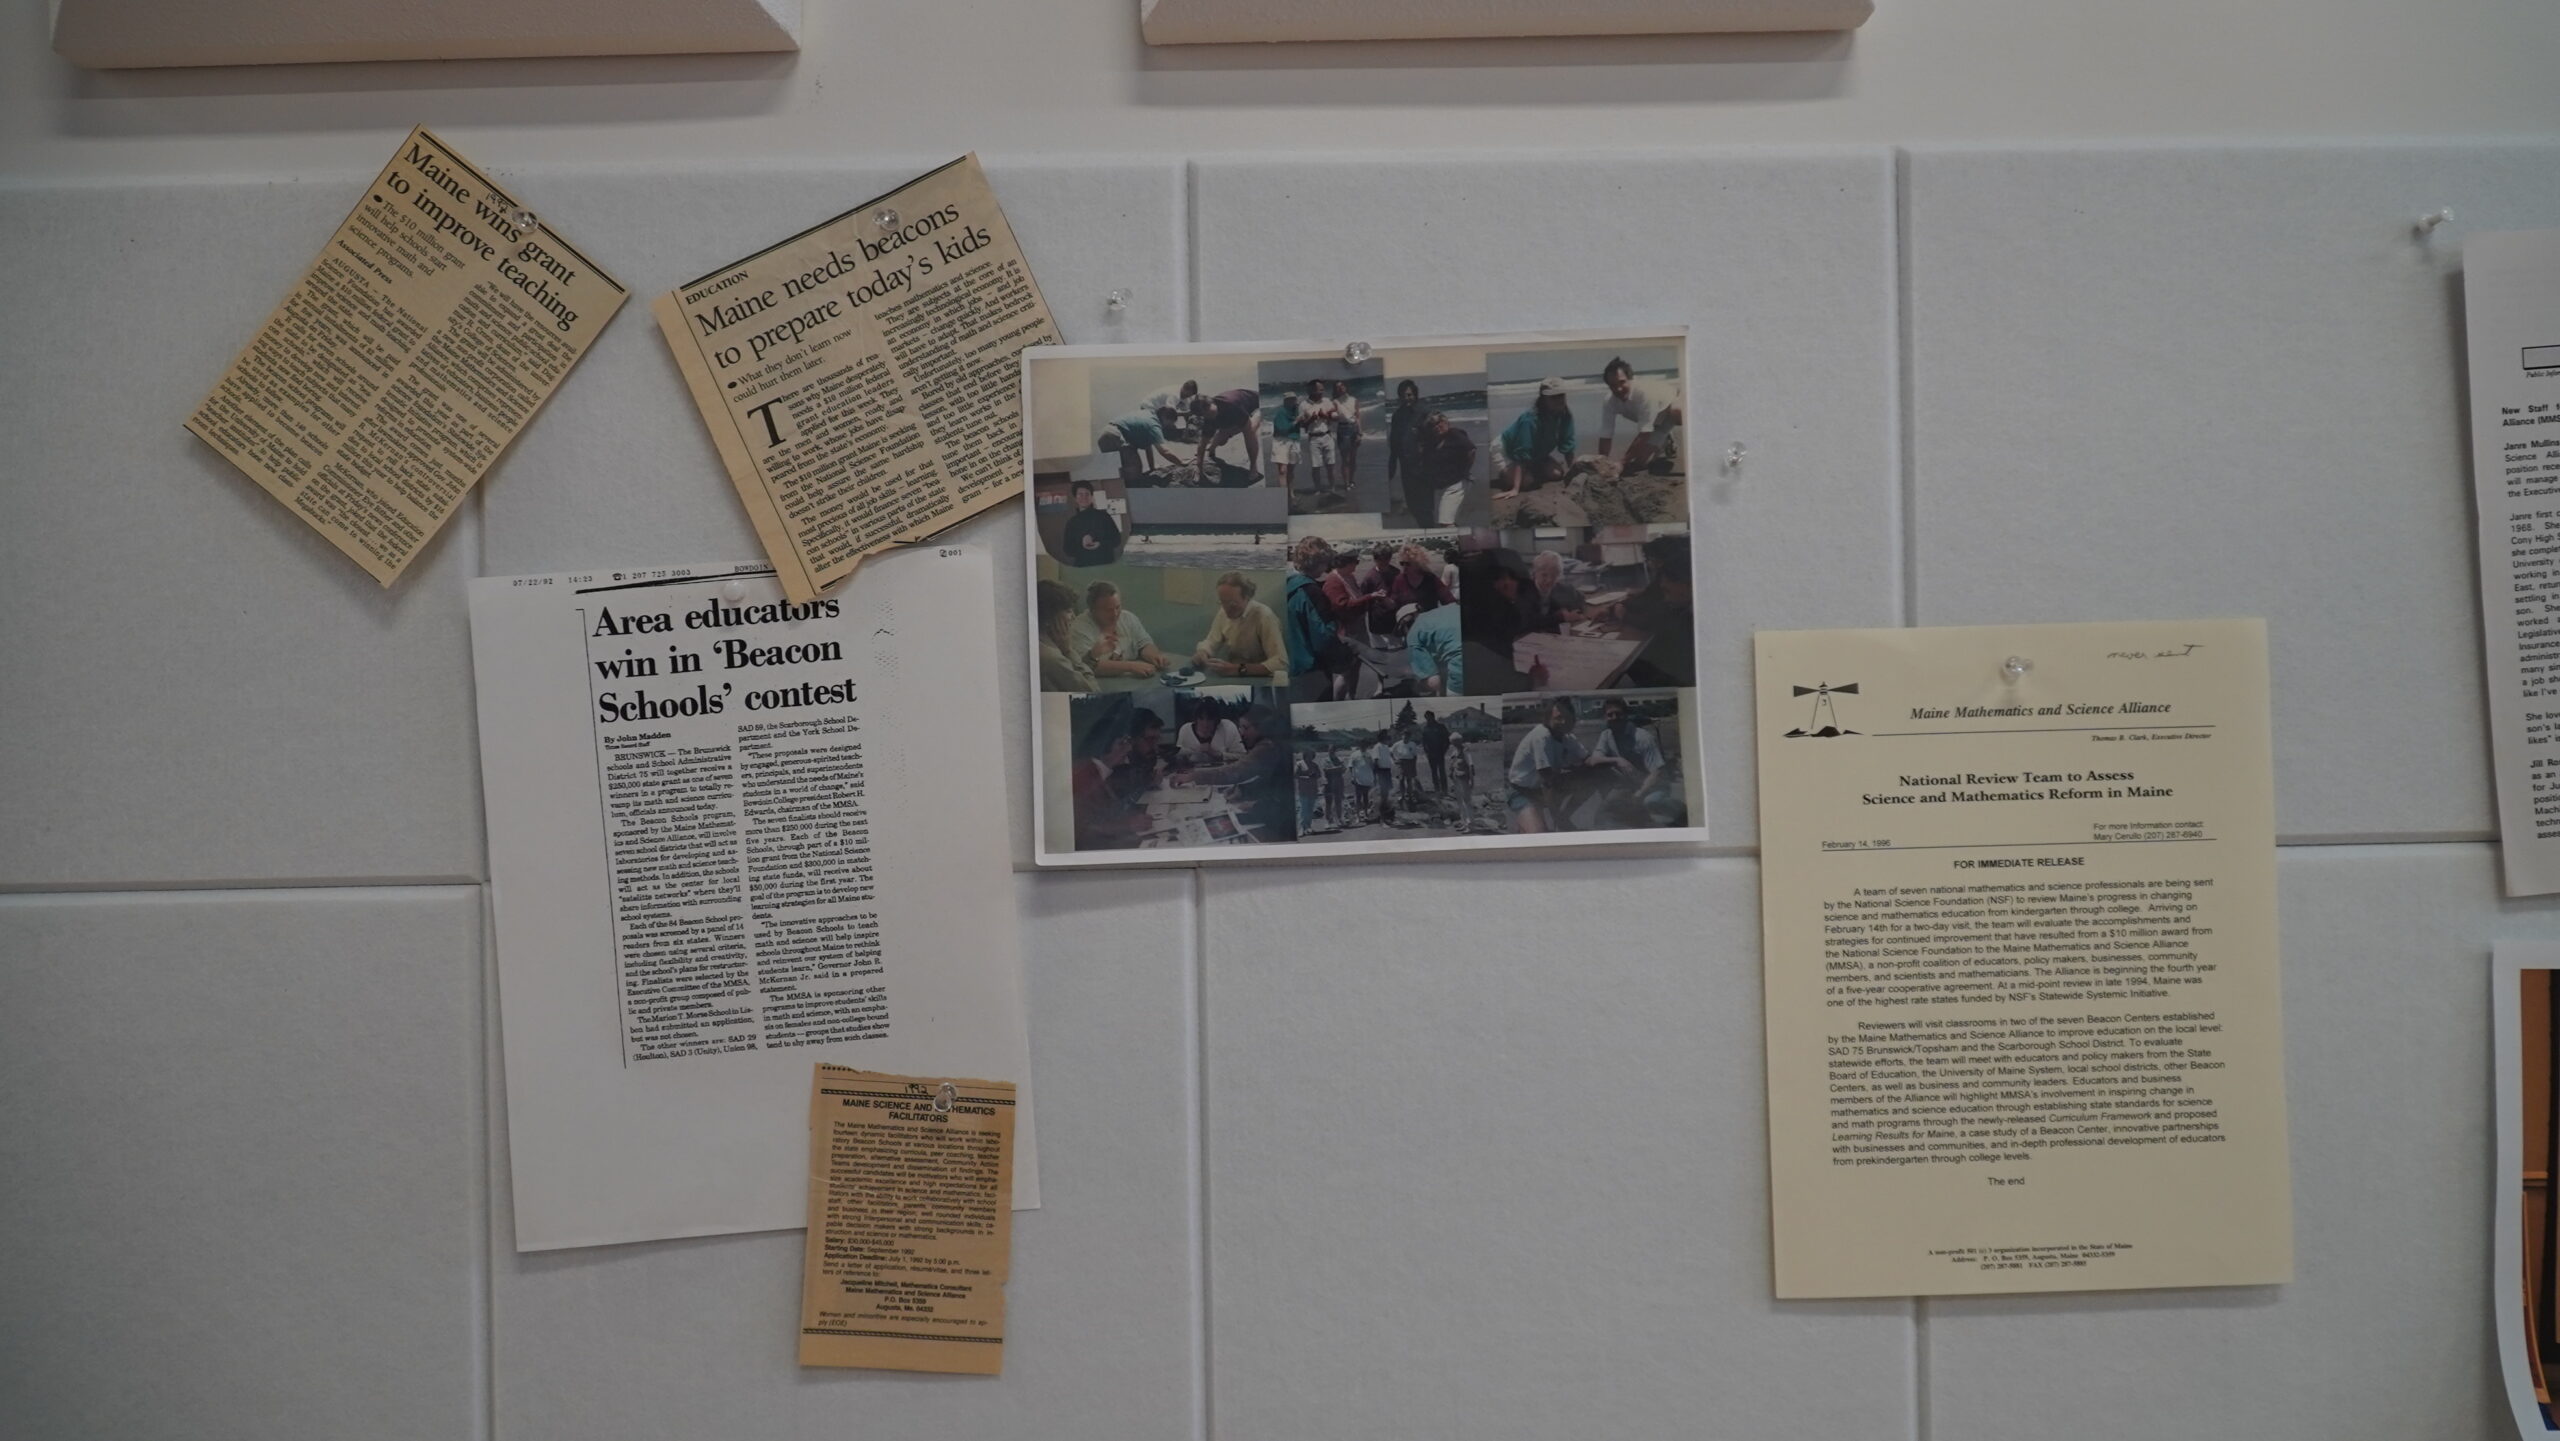 Assorted newspaper clippings from MMSA's founding as well as a collage of photos of past staff and events hung as a part of the timeline on the wall for the 30th anniversary event.